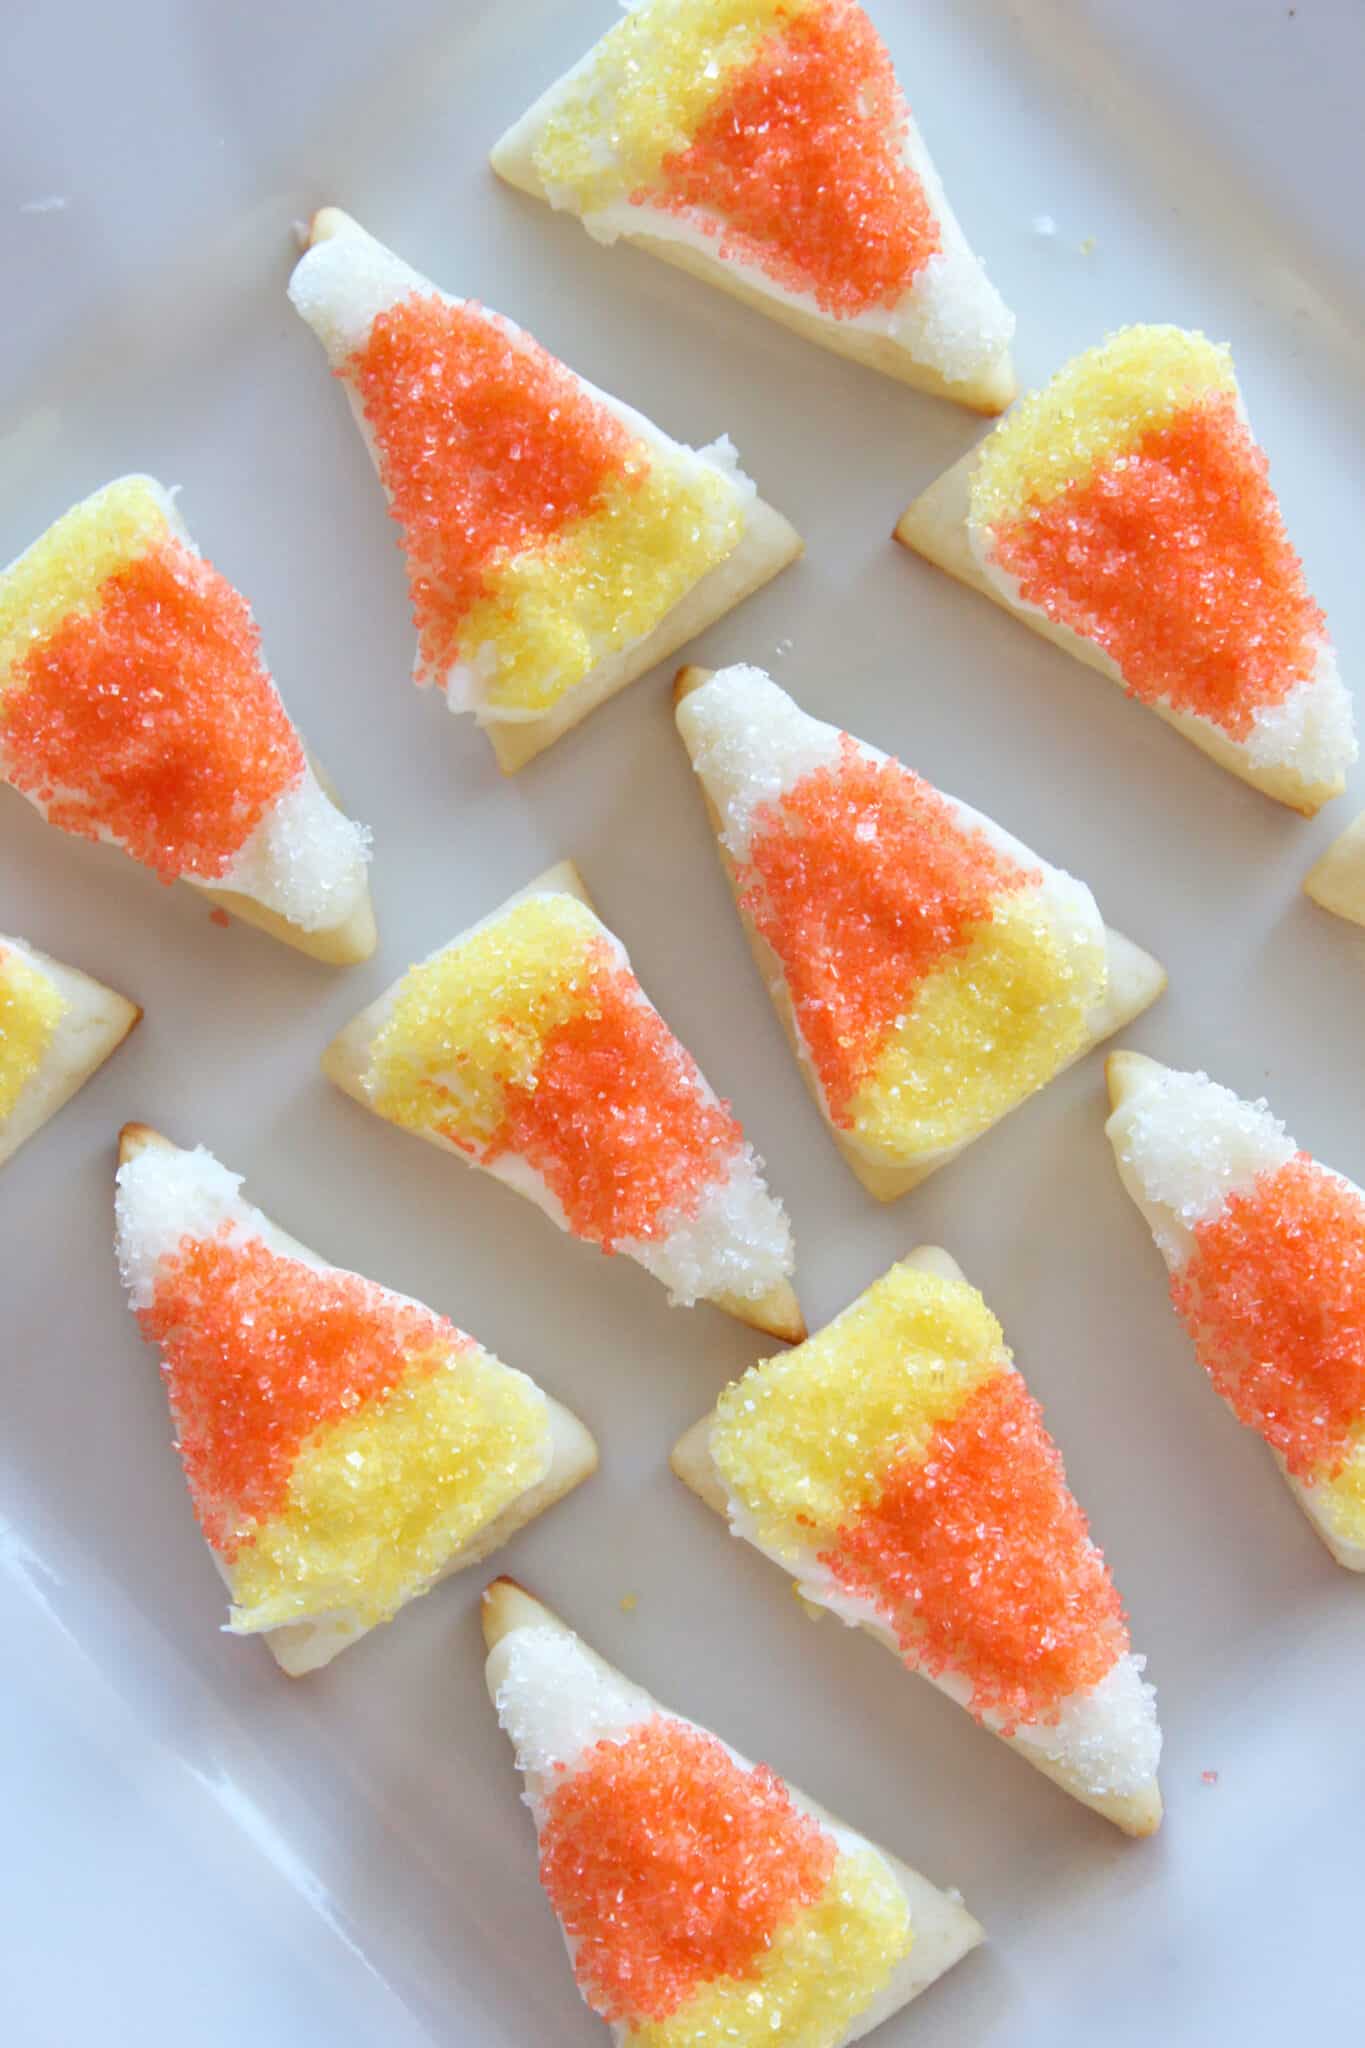 Candy Corn Sugar Cookie Bites featured by top US food blog, Practically Homemade